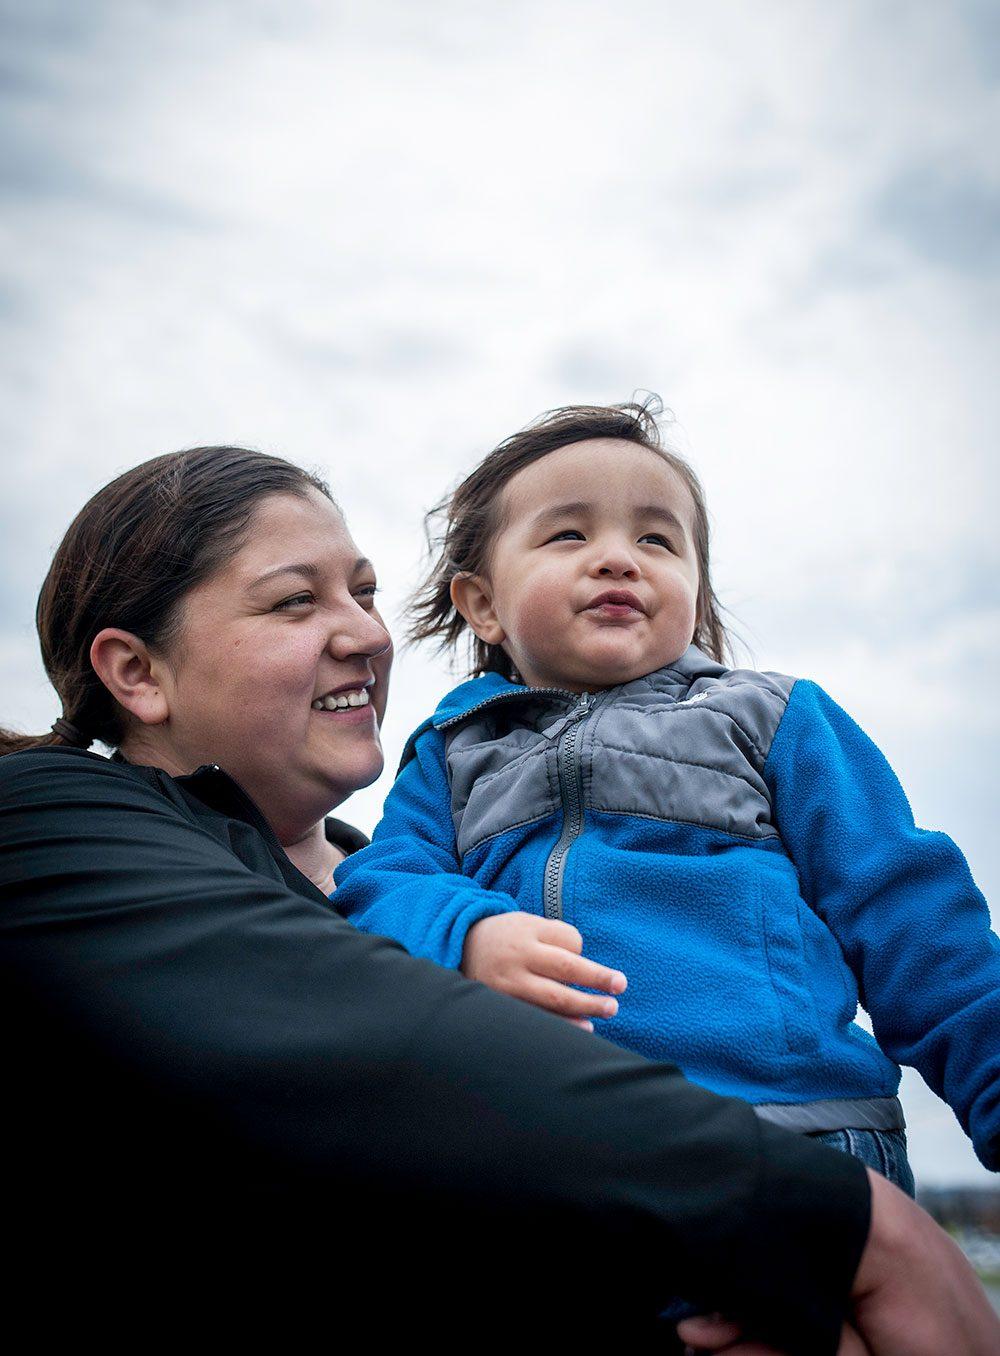 A Maine Wabanaki woman holds her child in her arms and smiles